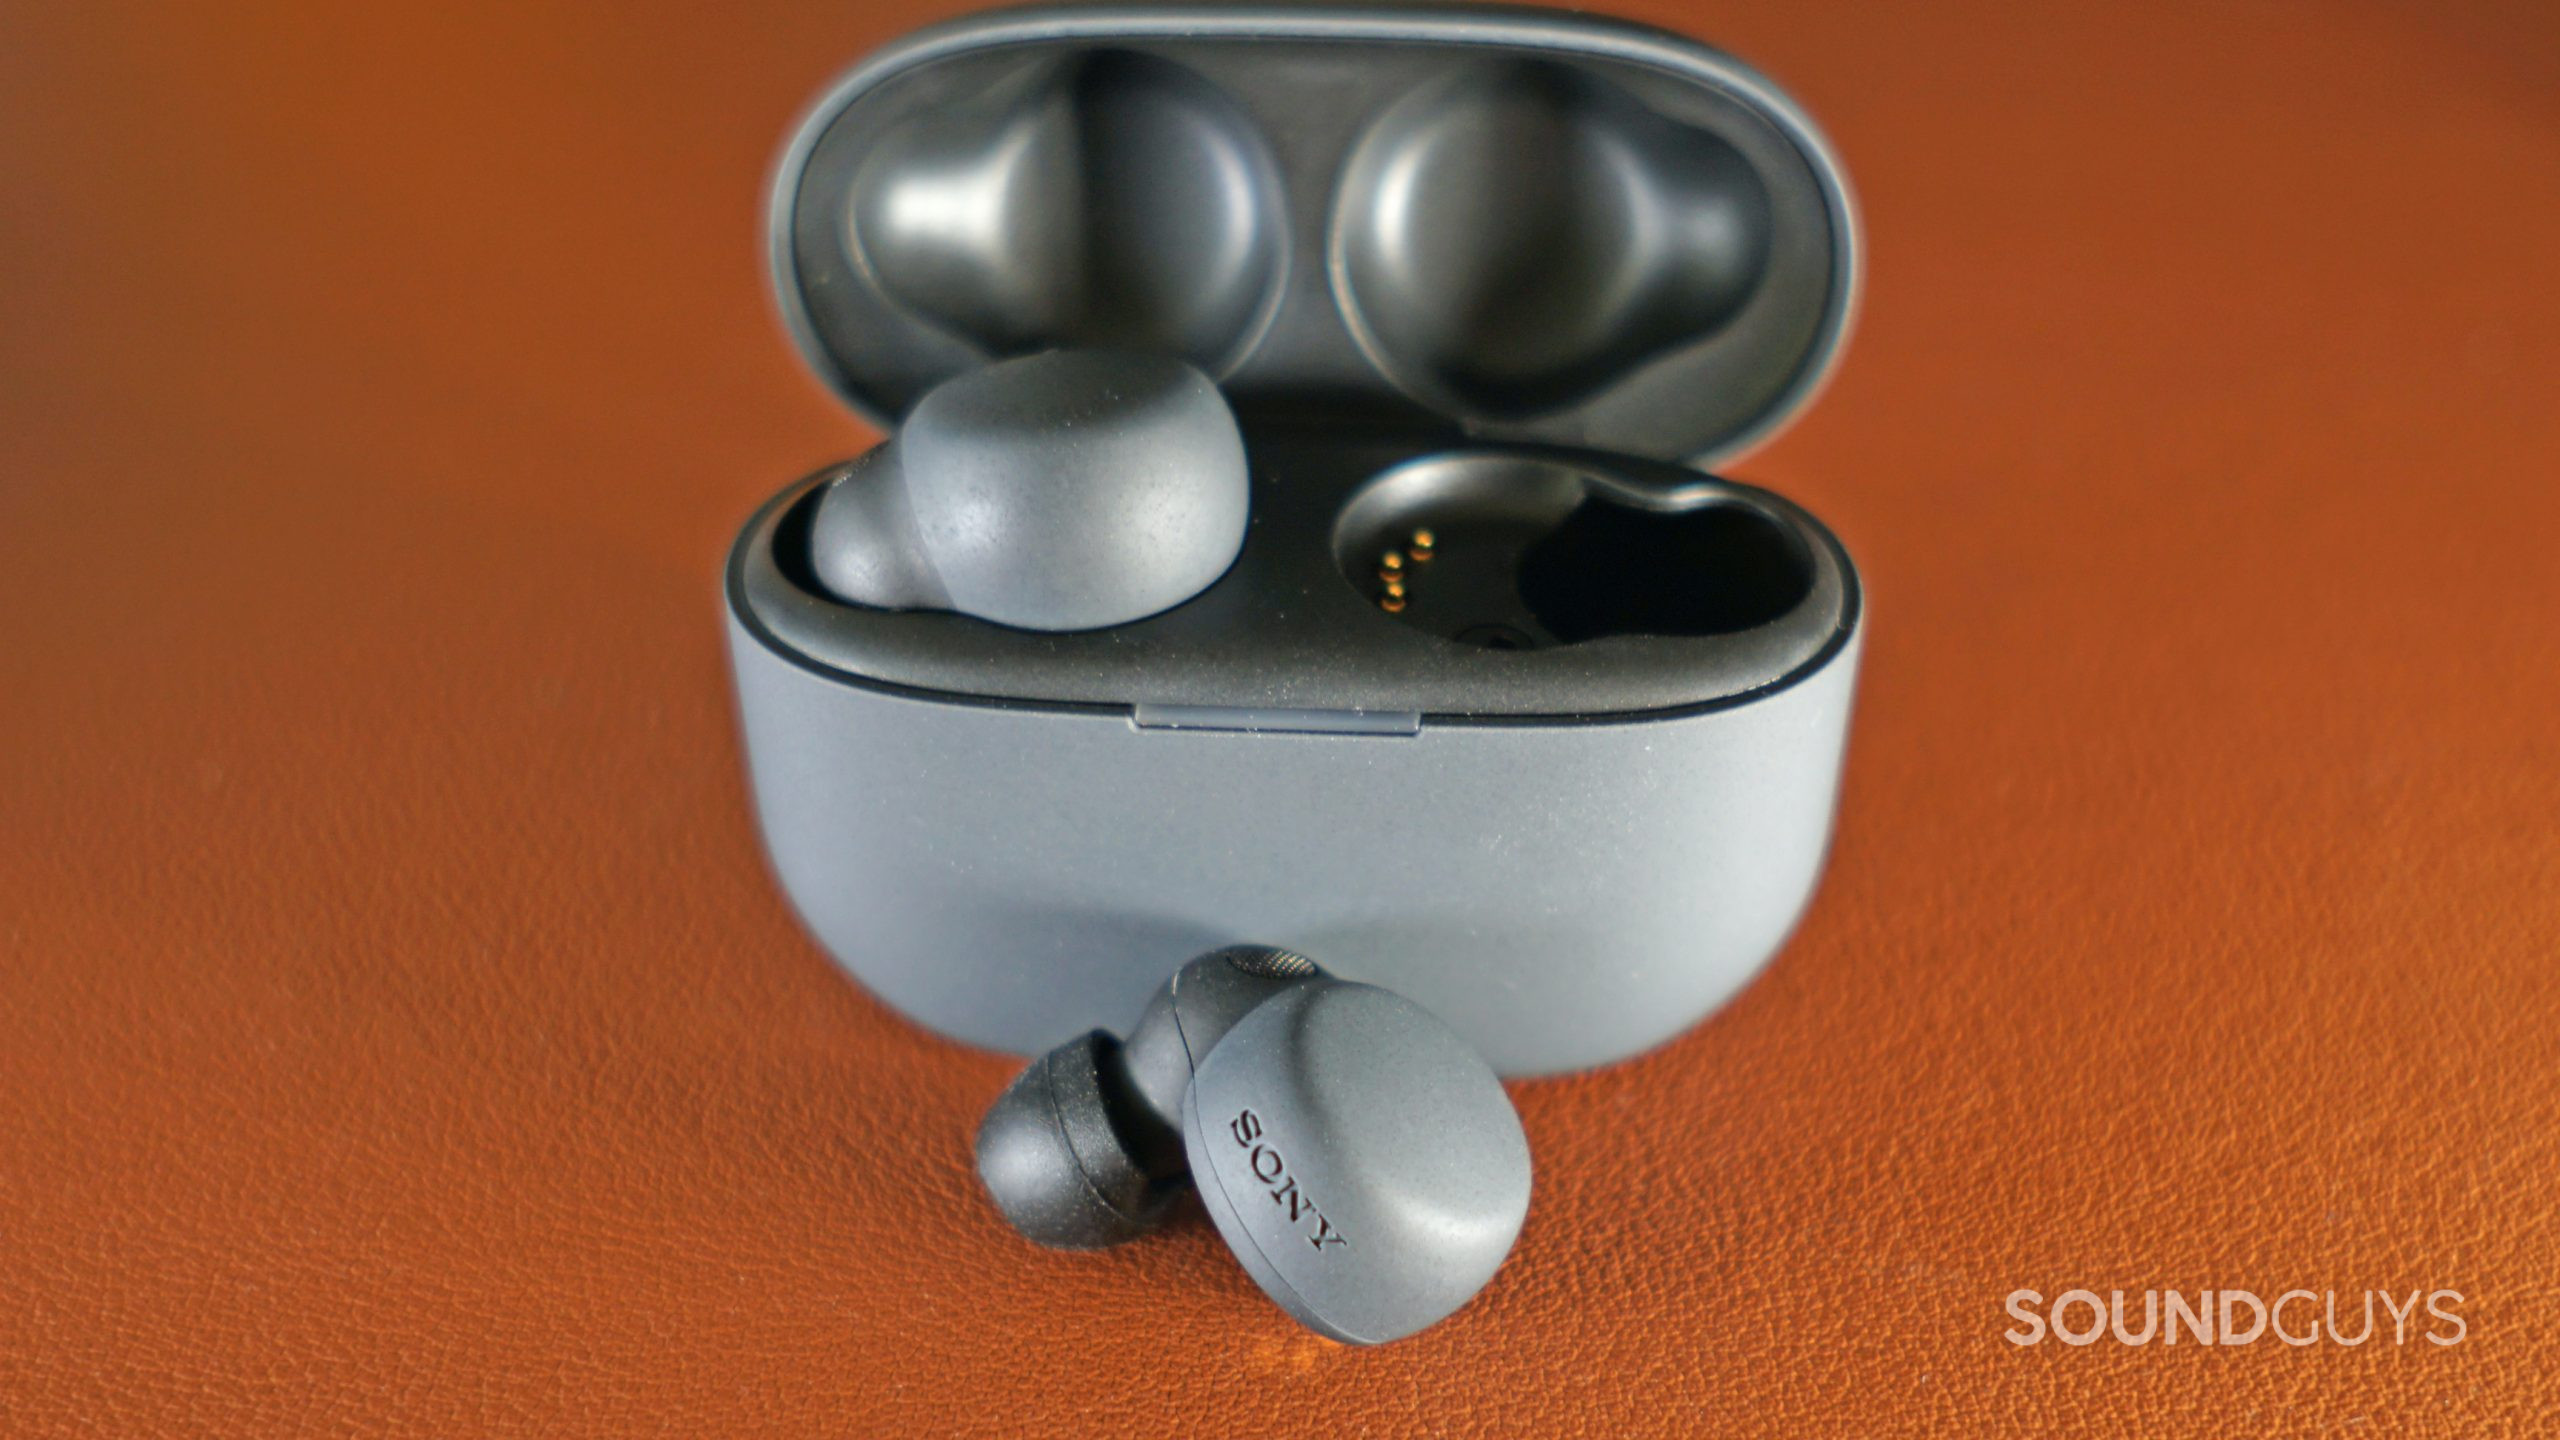 The Sony LinkBuds S sits on a leather surface with one earbud out.